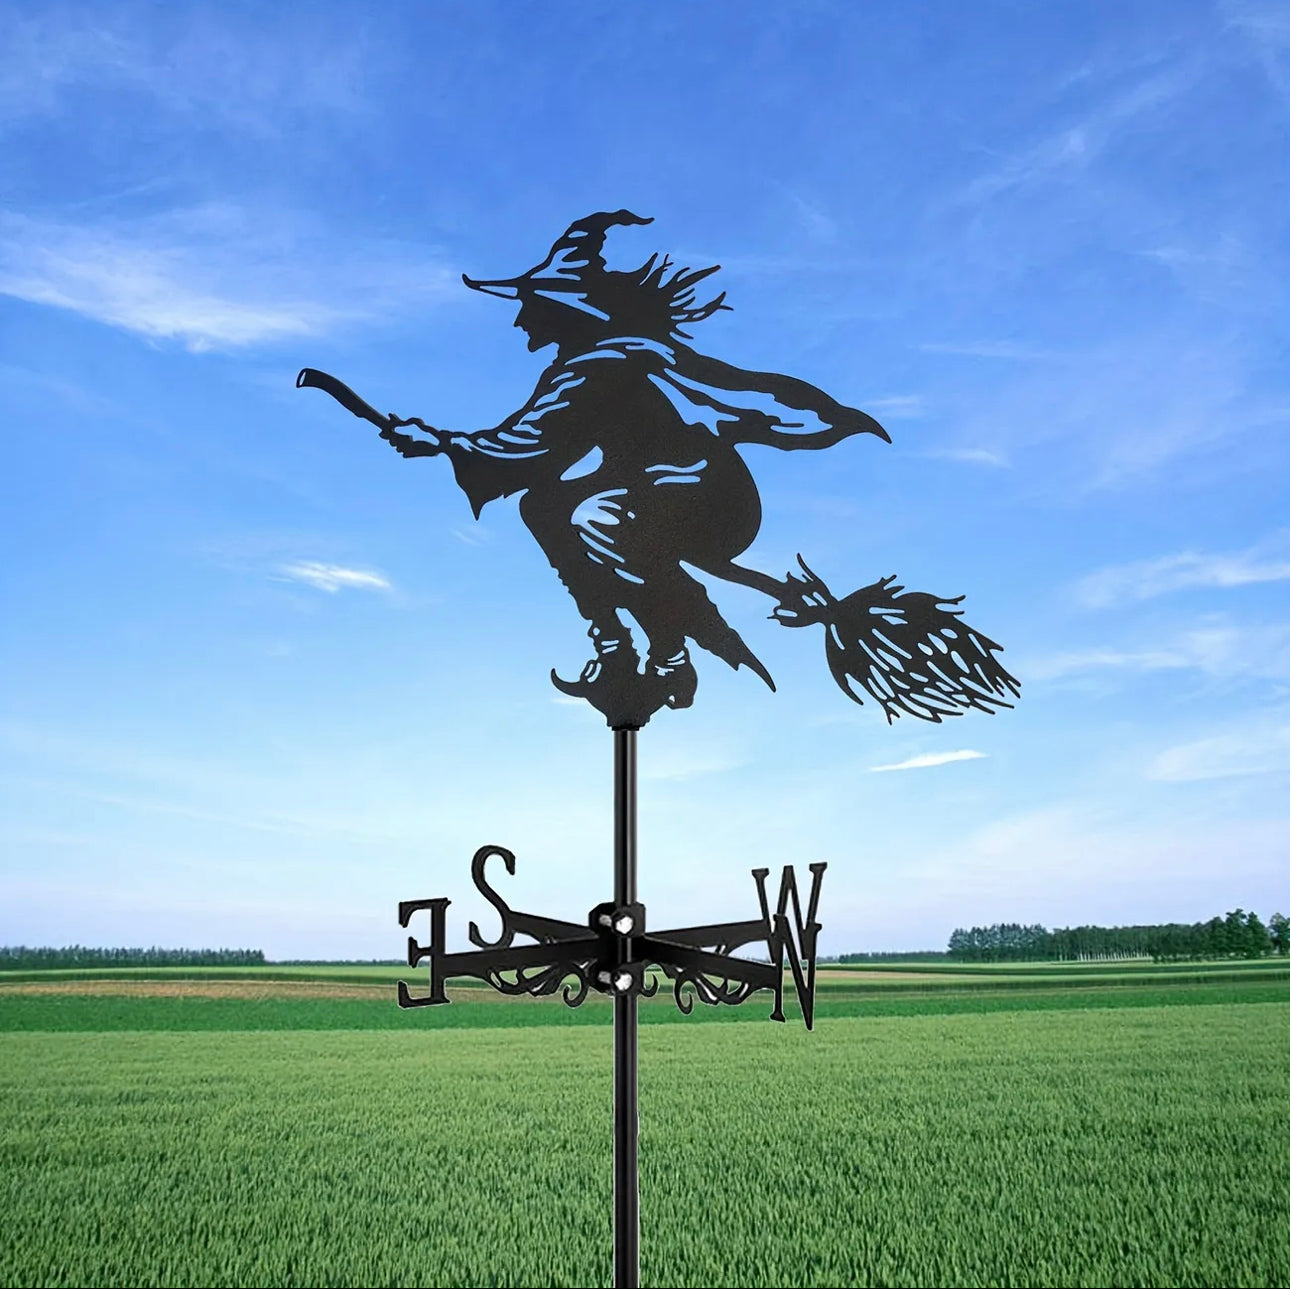 1pc Weathervane Garden Weather Vane For Roof Mount Wind Direction Indicator Stainless Steel Creative Magic Broom Shape Metal Weathercock For Farm Yard Home Decor Ornament